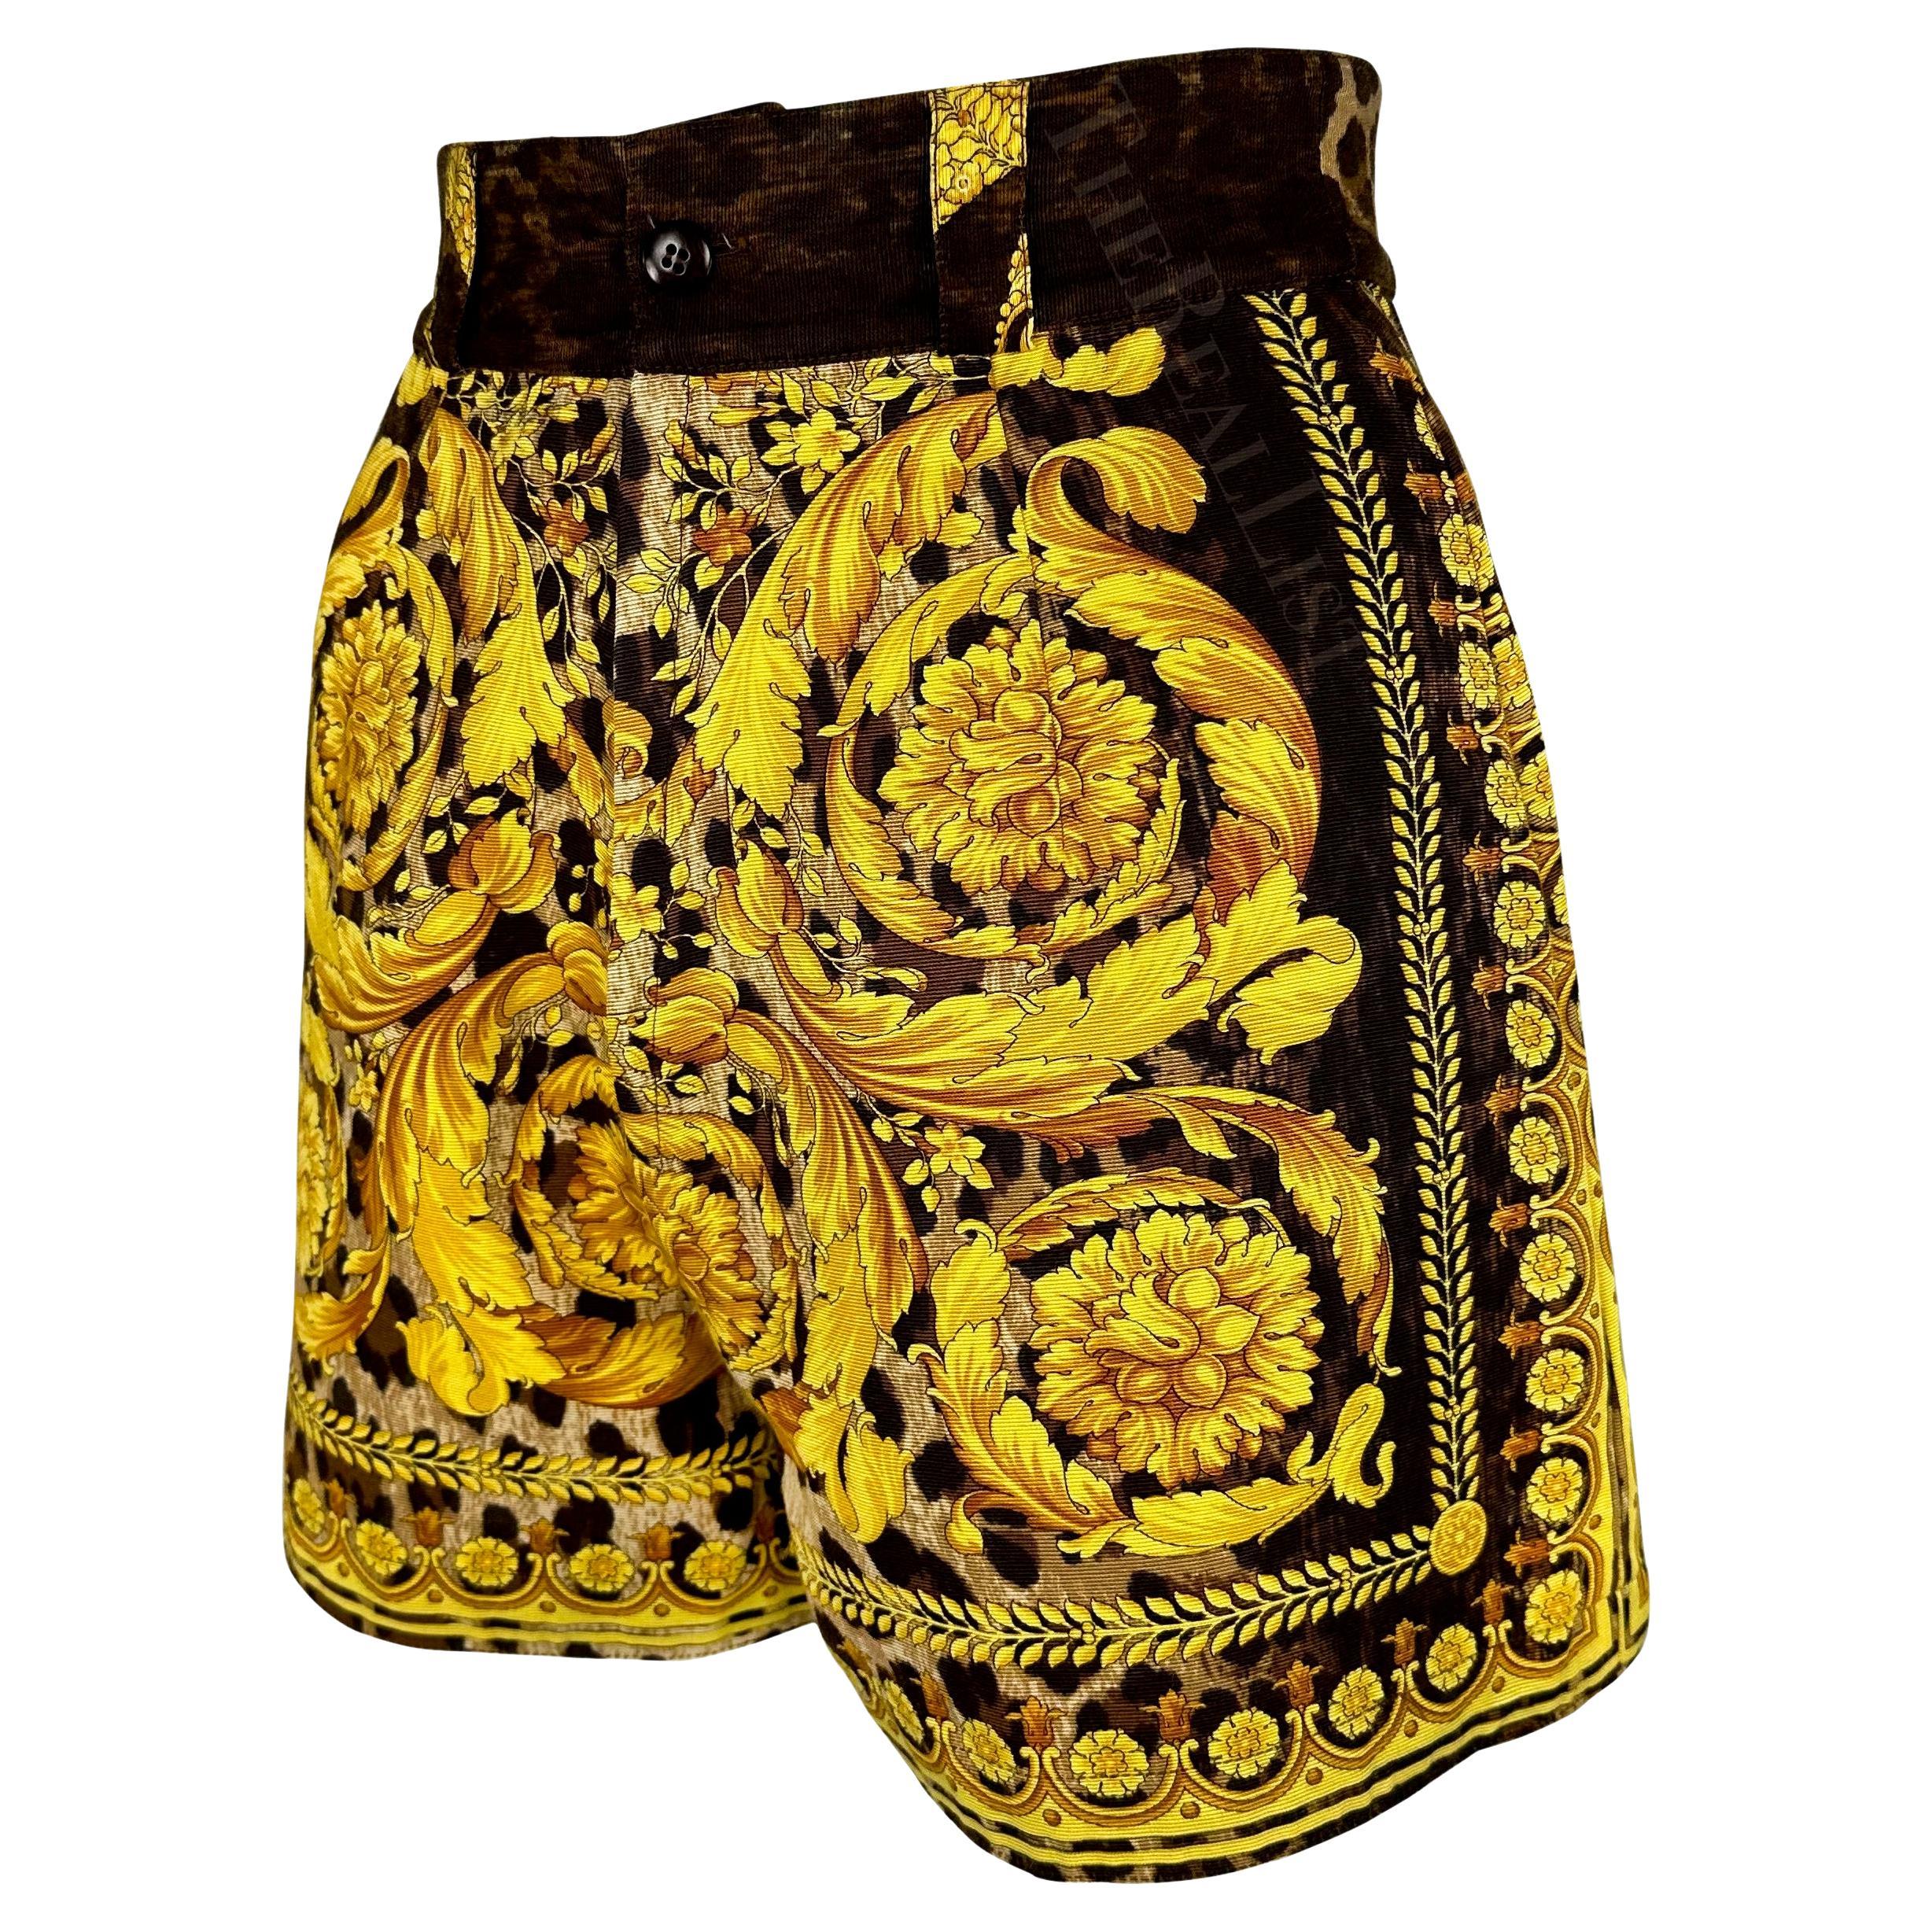 S/S 1992 Gianni Versace Runway Gold Baroque Leopard Print High Waisted Shorts In Good Condition For Sale In West Hollywood, CA